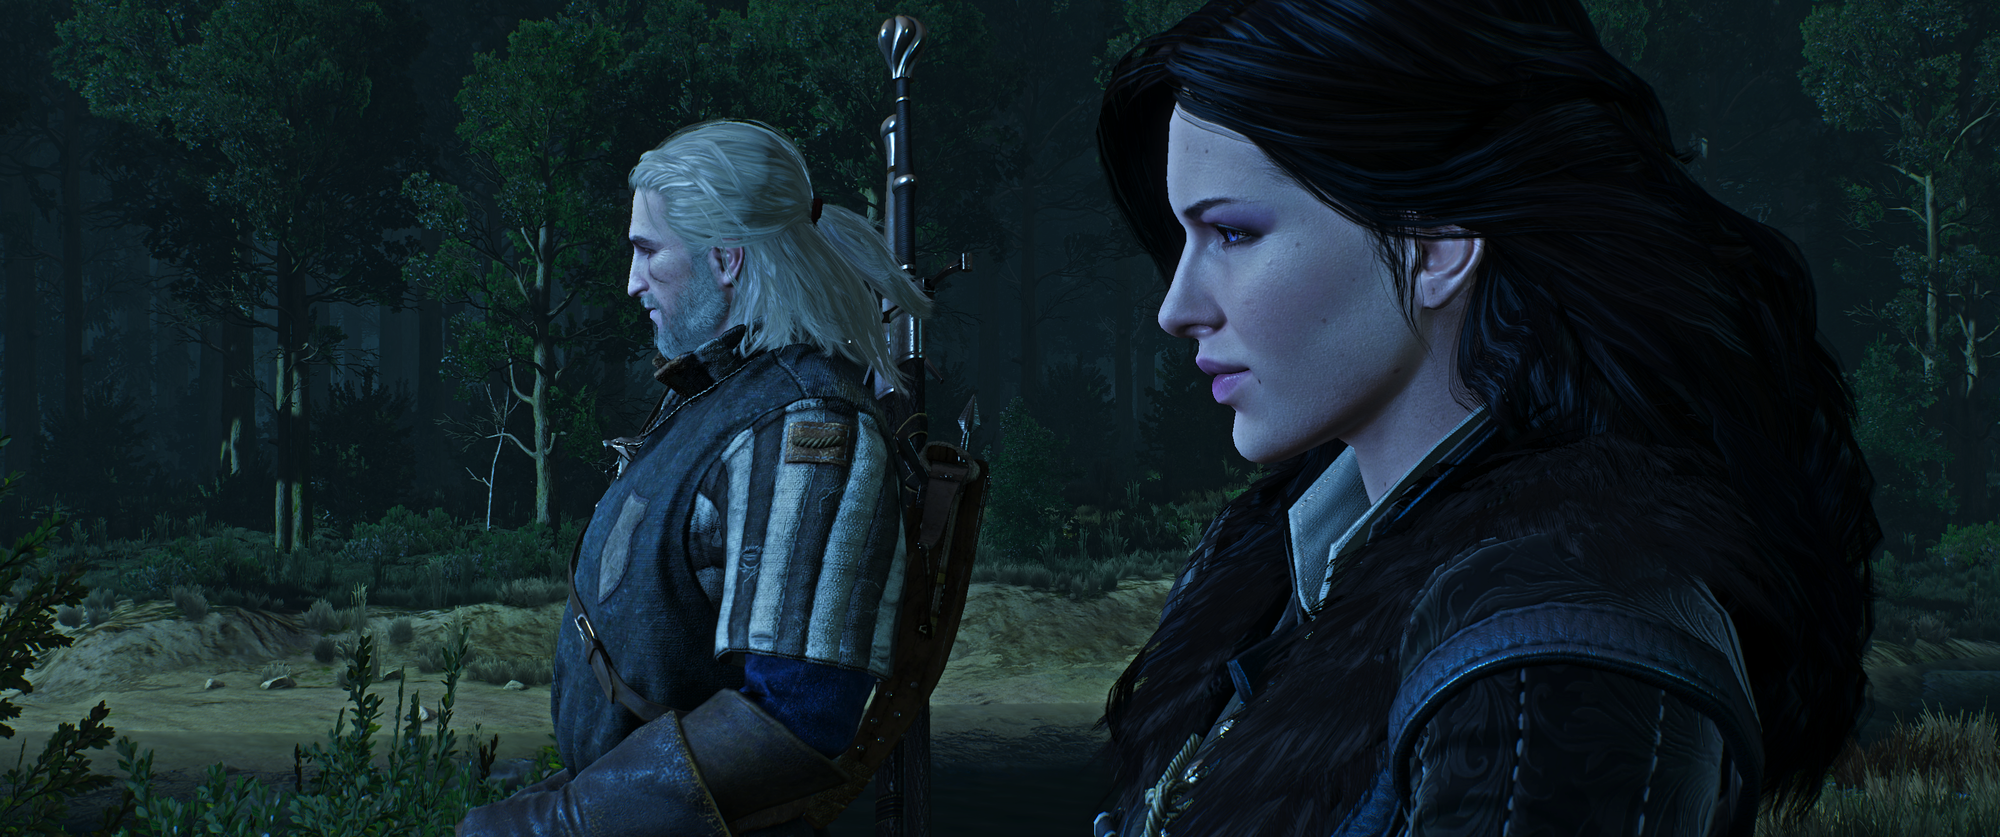 The Witcher 3 Screenshot 2019.01.02 - 22.49.58.85.png